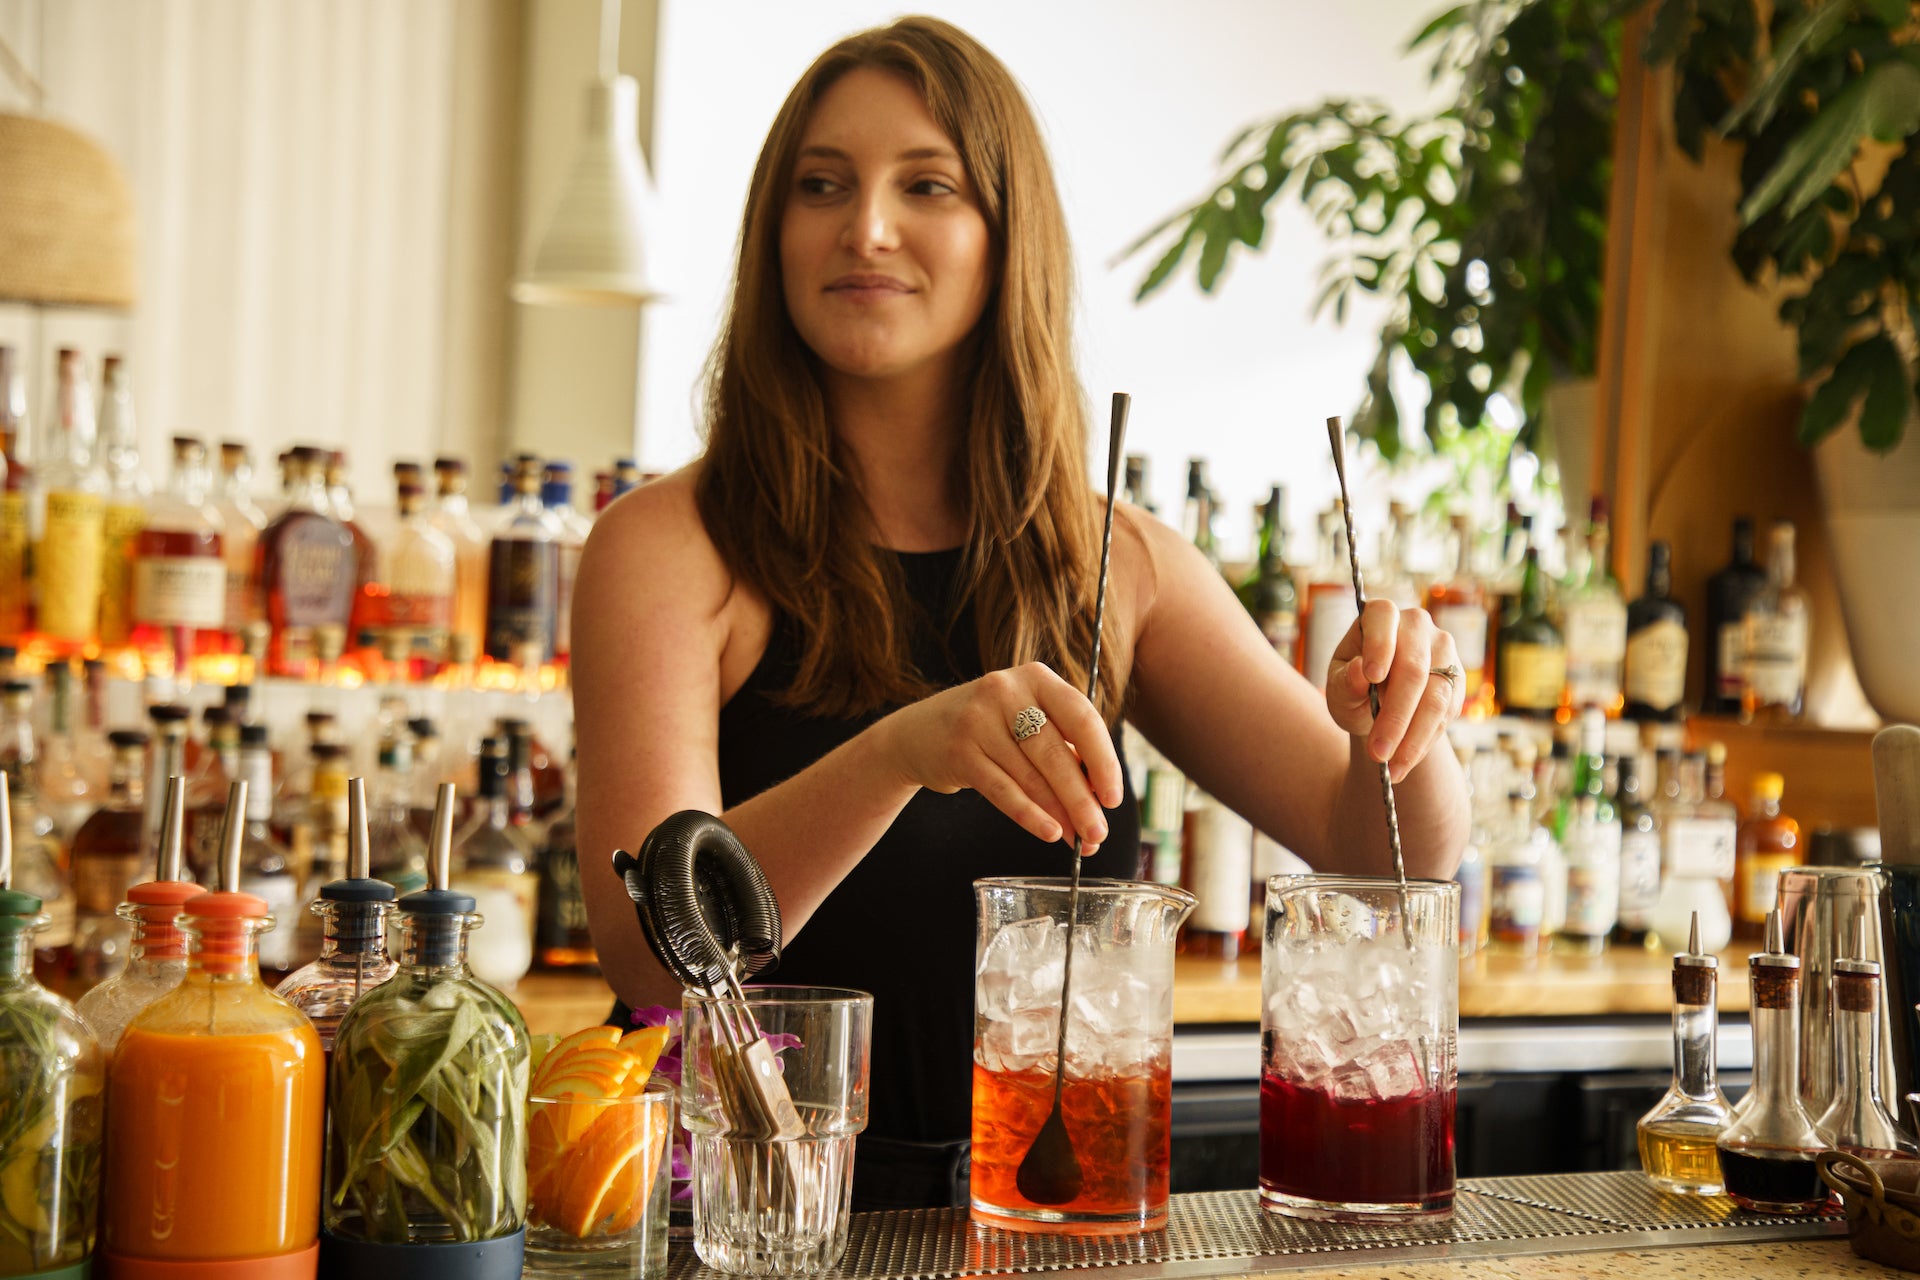 Professional bartender mixing drinks behind a bar